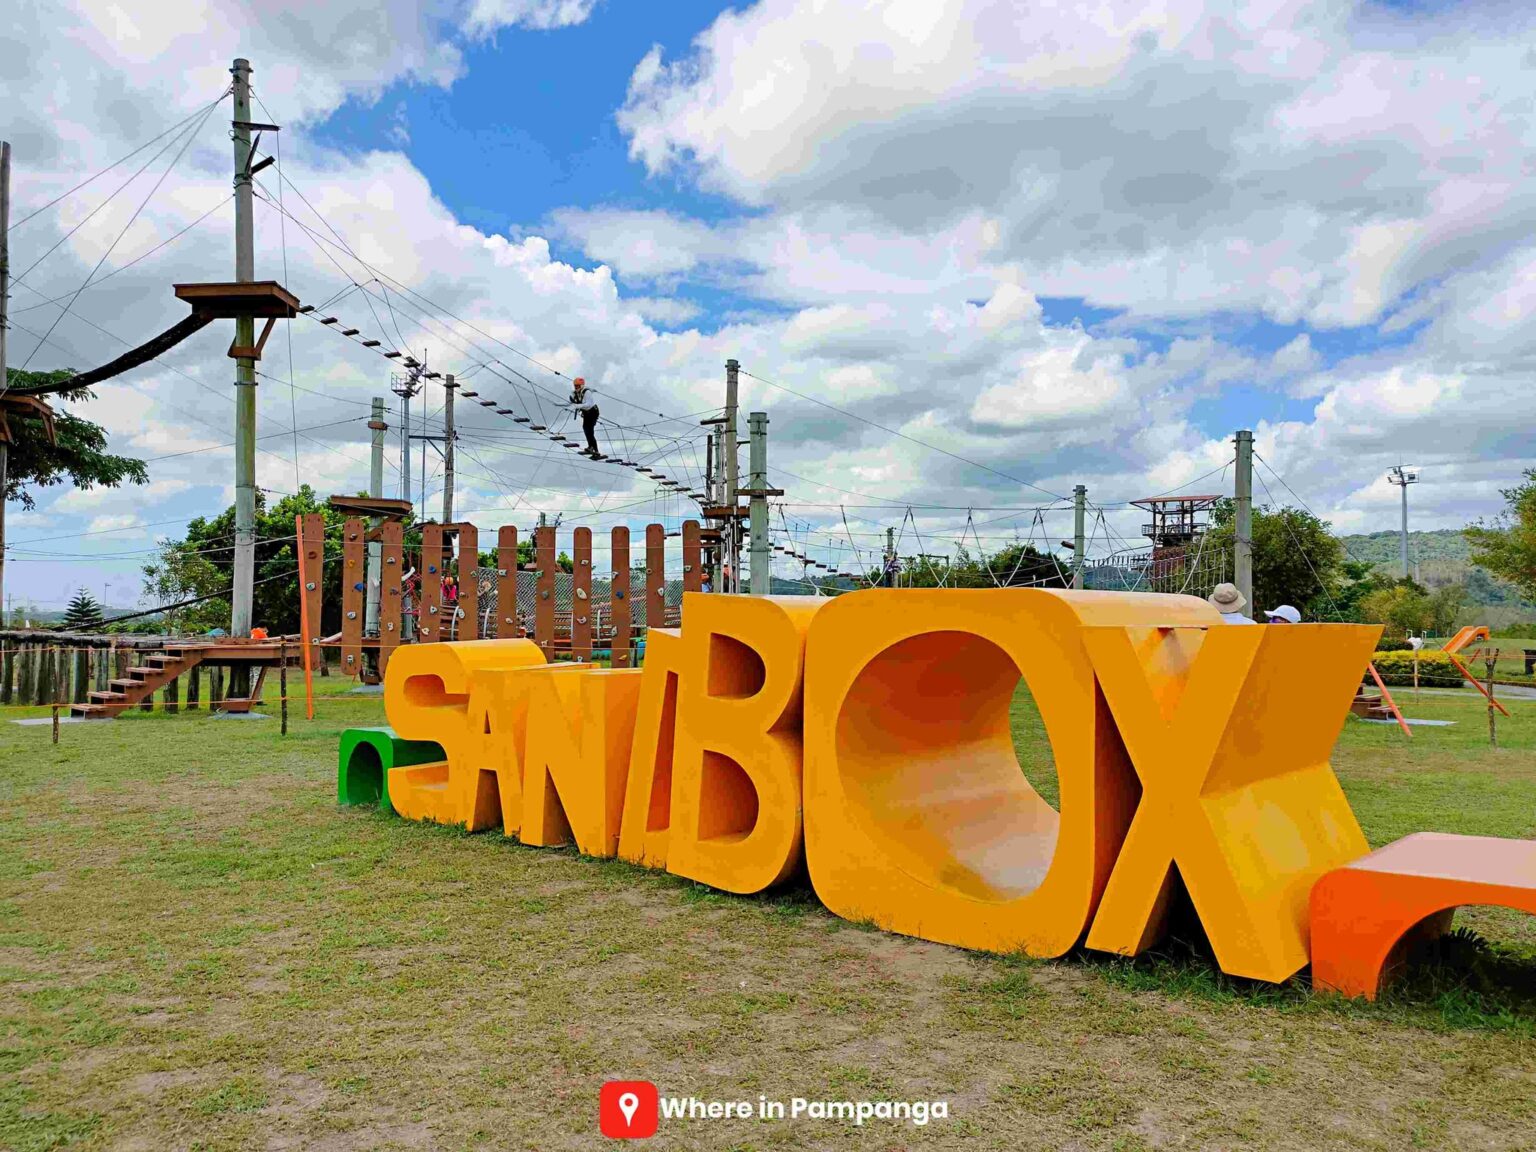 A Quick Guide To The Pampangas Best Attractions And Activities To Do Where In Pampanga 5782